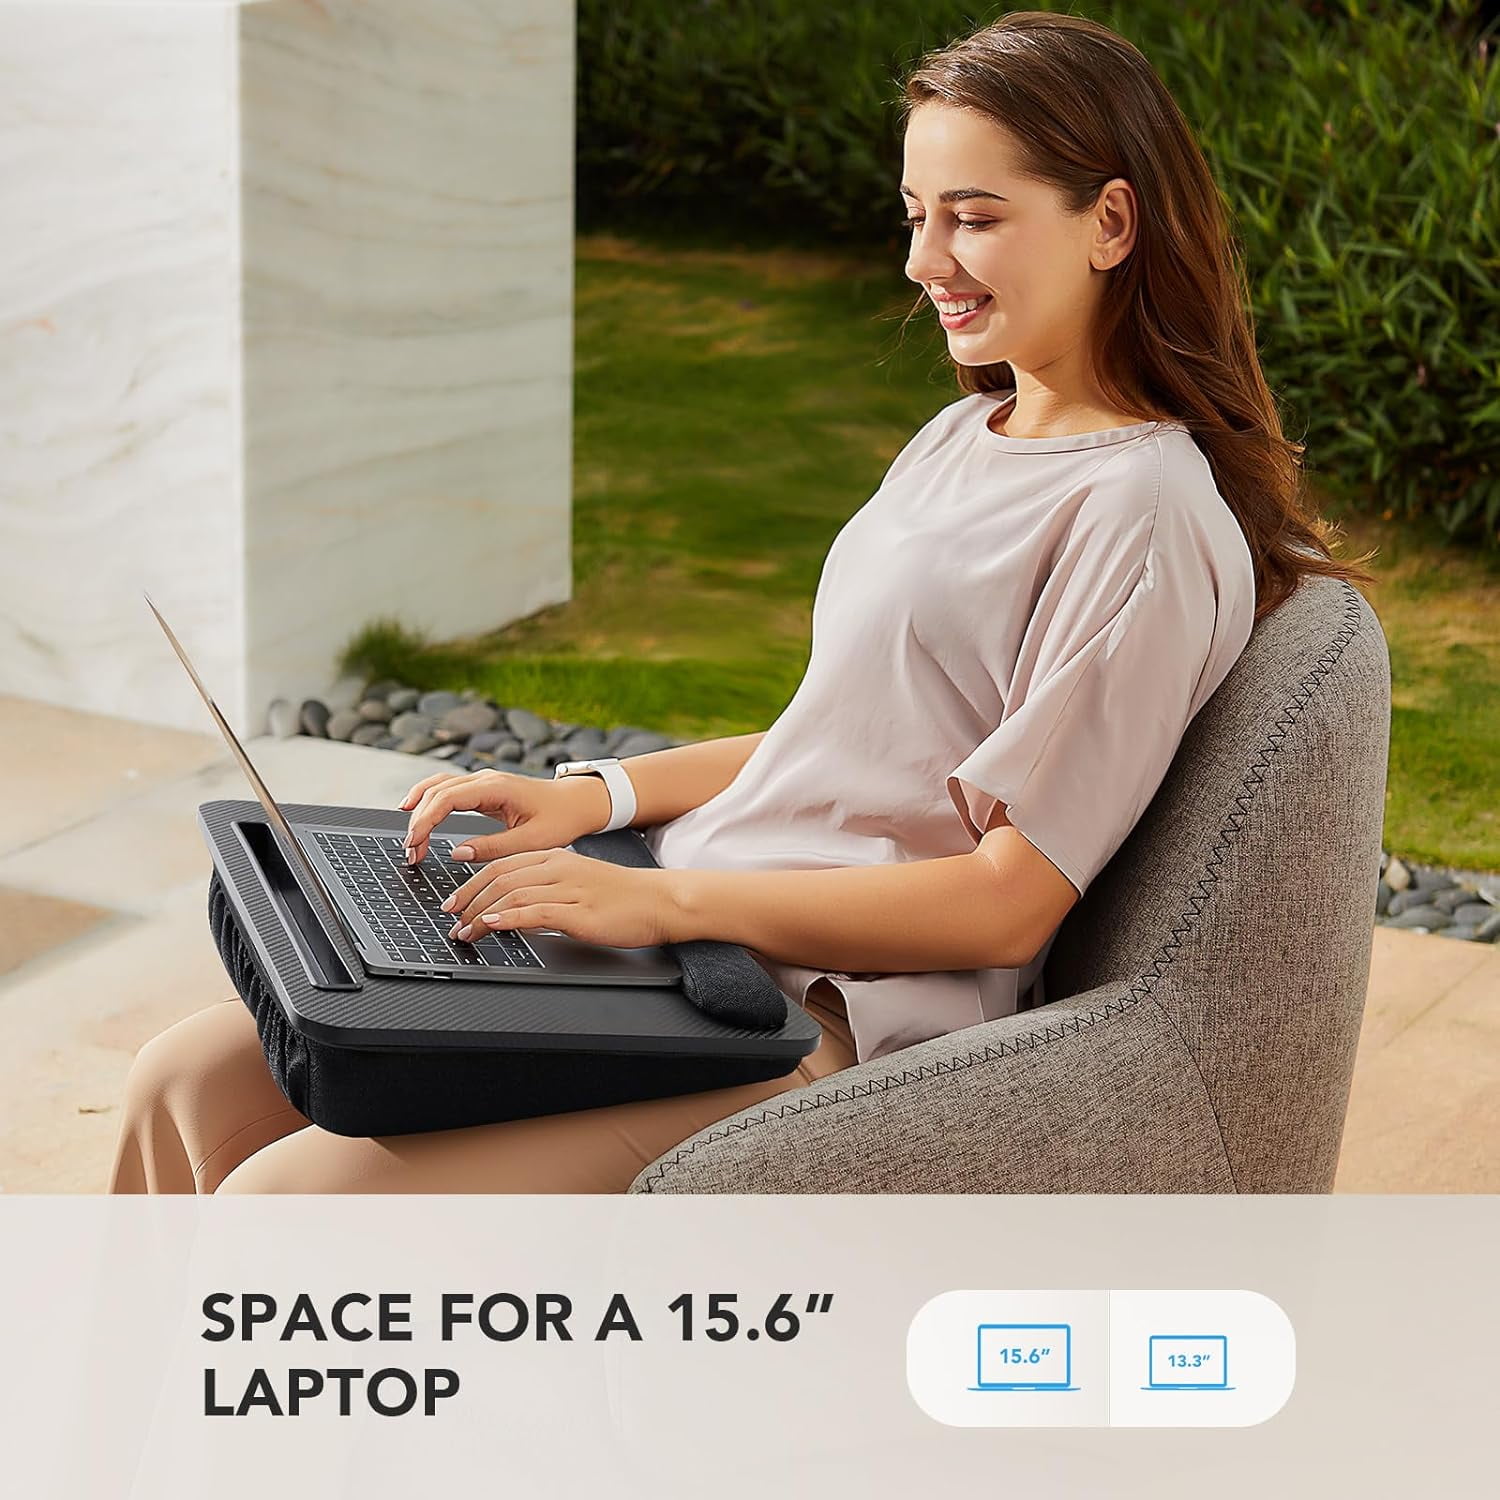  VLOXO Lap Desk with Cushion Portable Laptop Stand with Pillow,  3 in 1 Lap Desk Phone Holder, Desk Tray with Slot & Anti-Slip Strip,  Support up to 14 Inch Laptop 